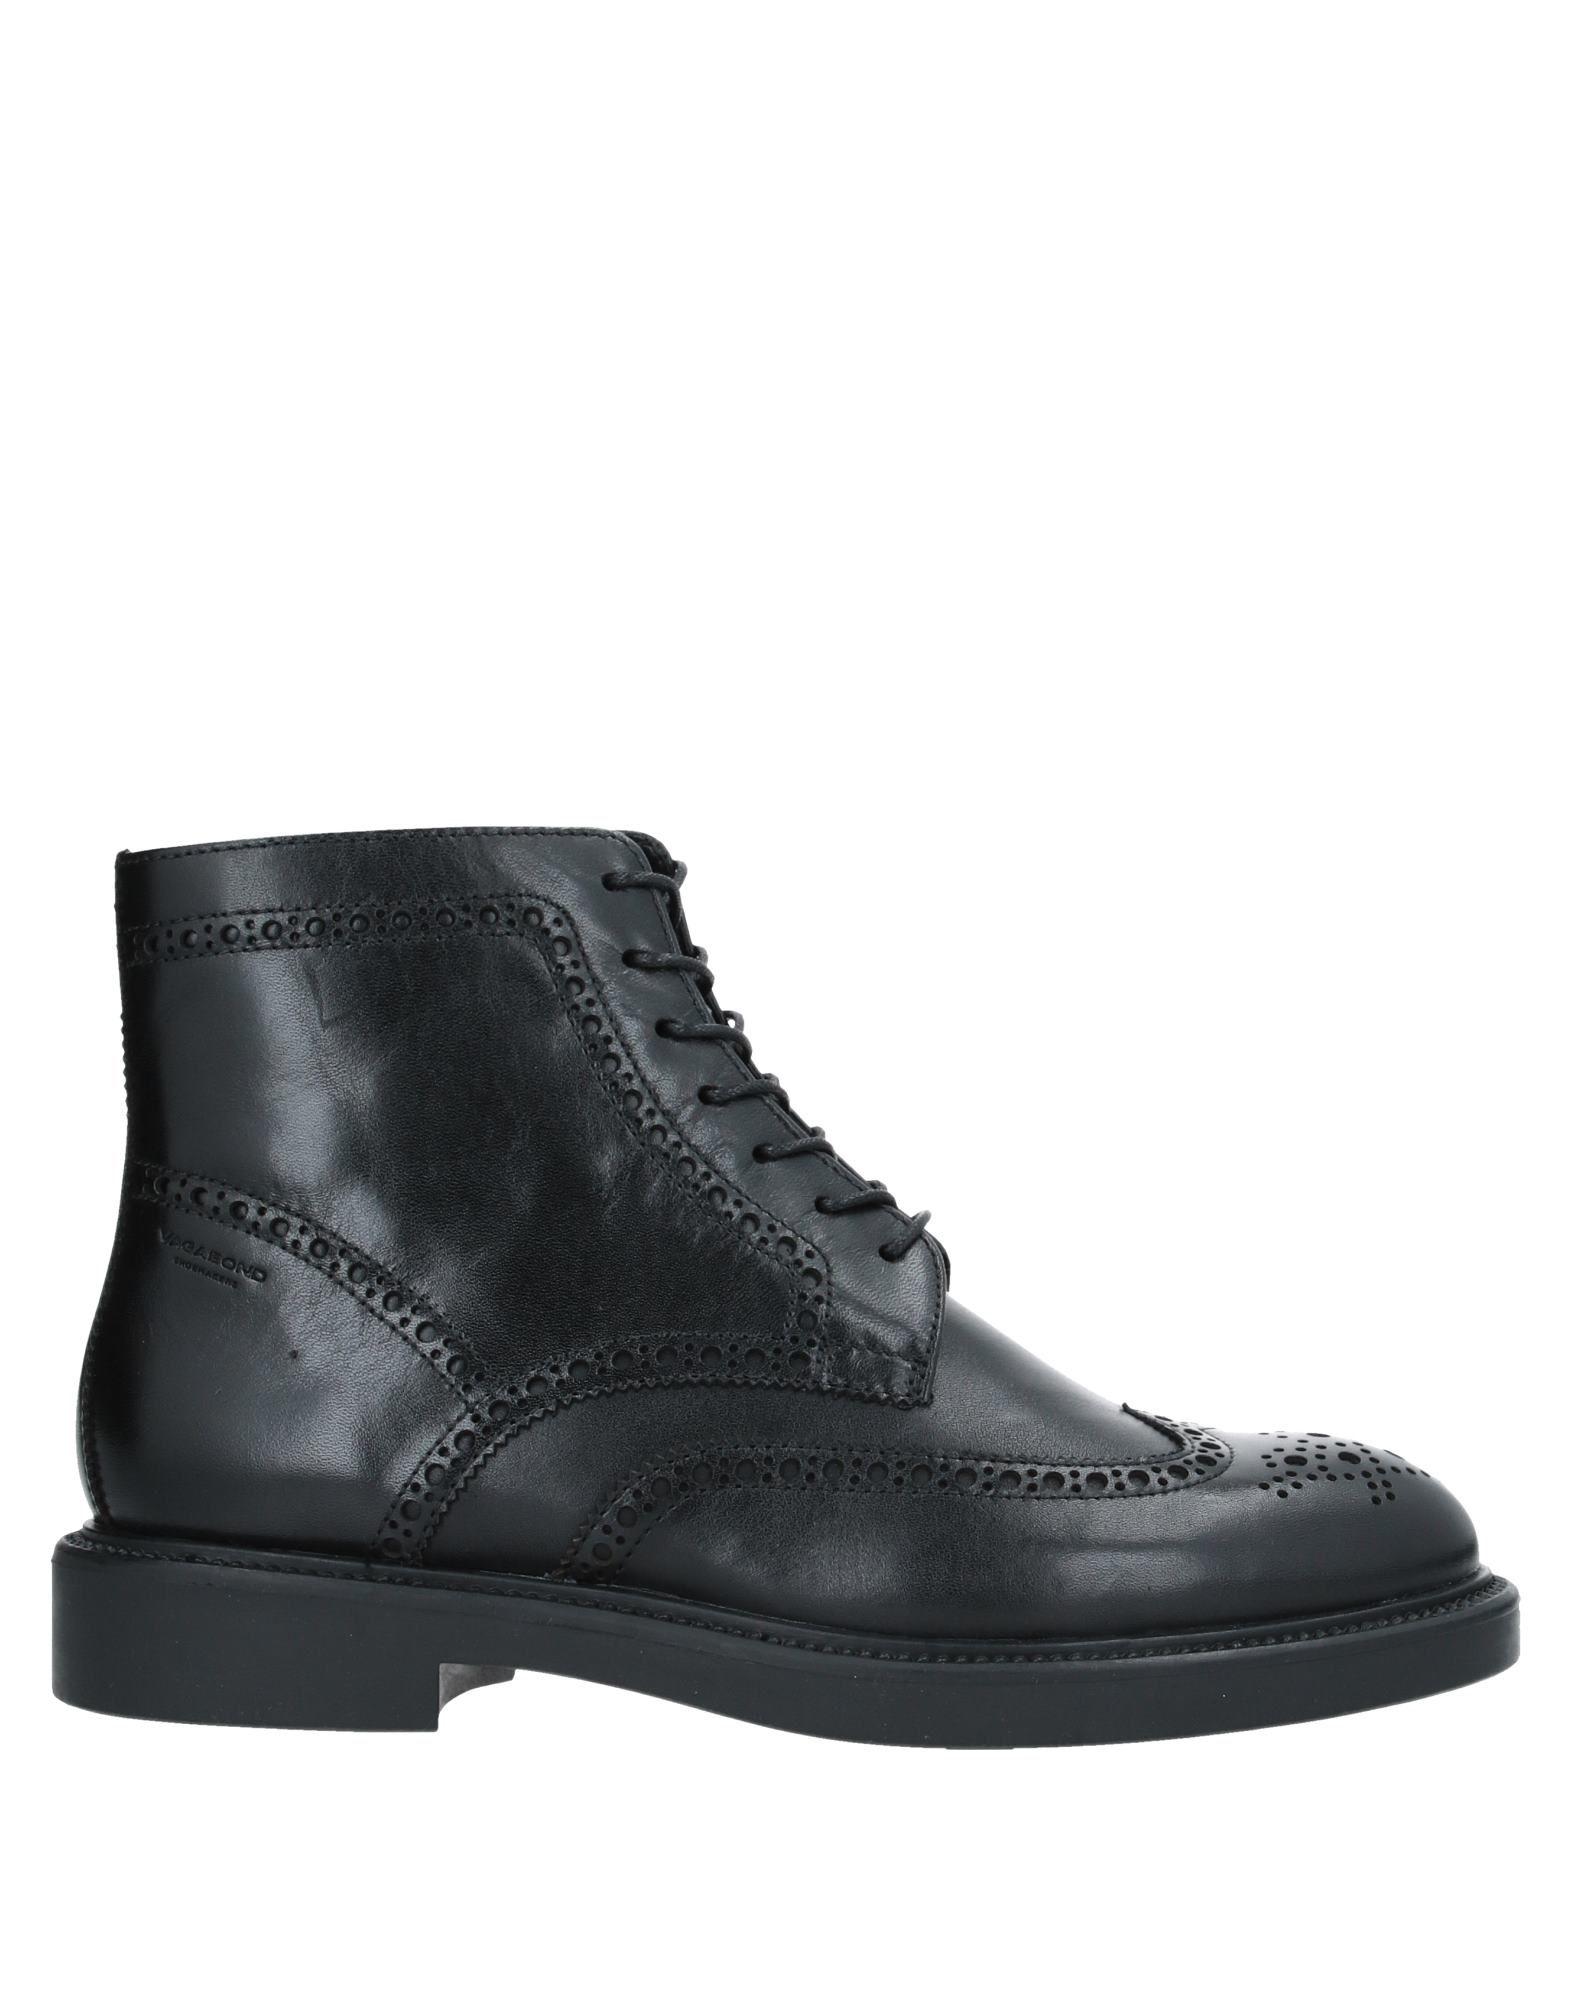 Vagabond Leather Ankle Boots in Black - Lyst